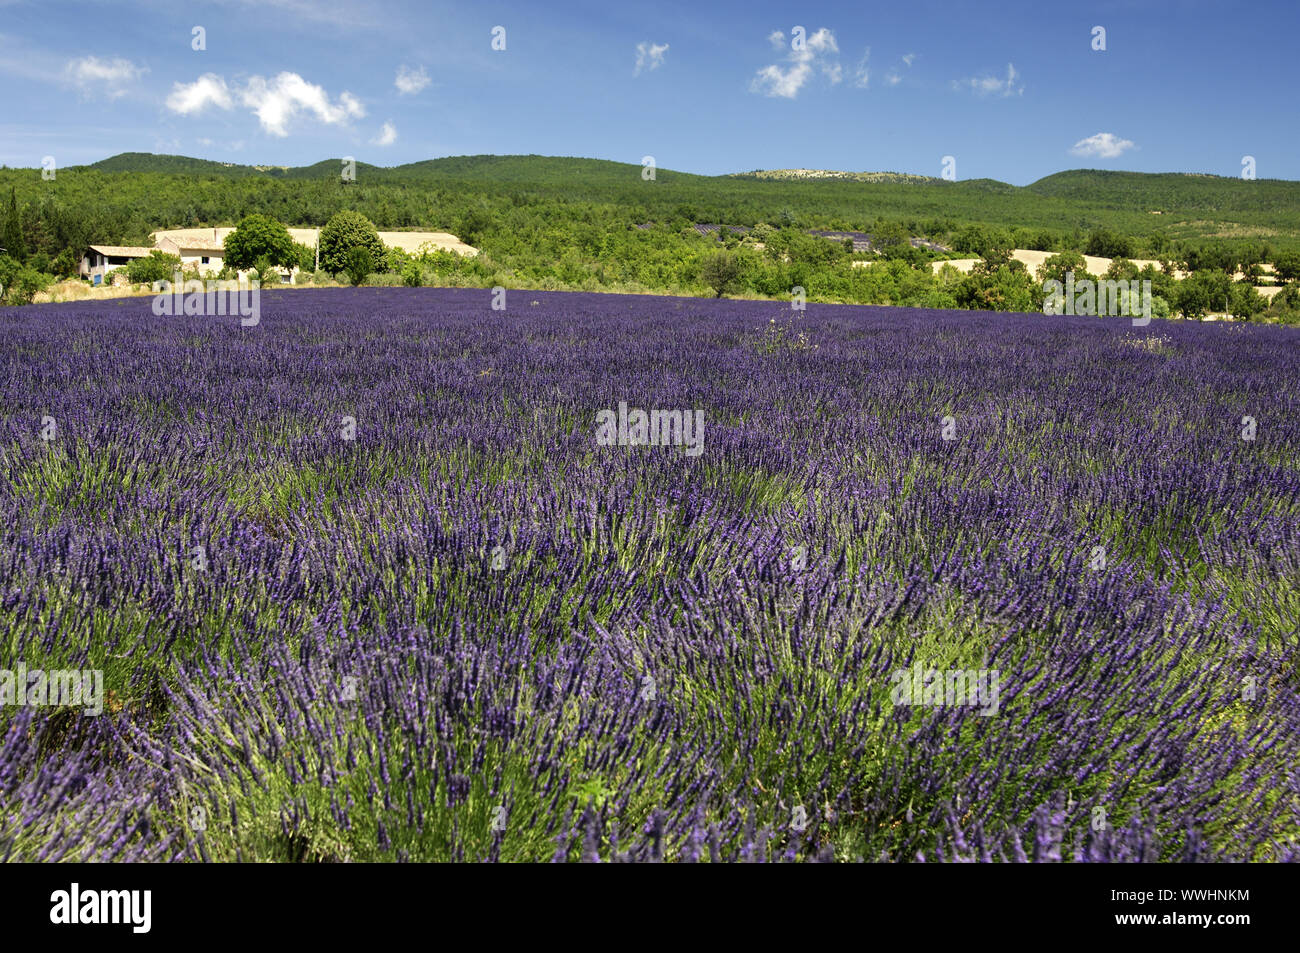 Lavender cultivation, Provence, France Stock Photo